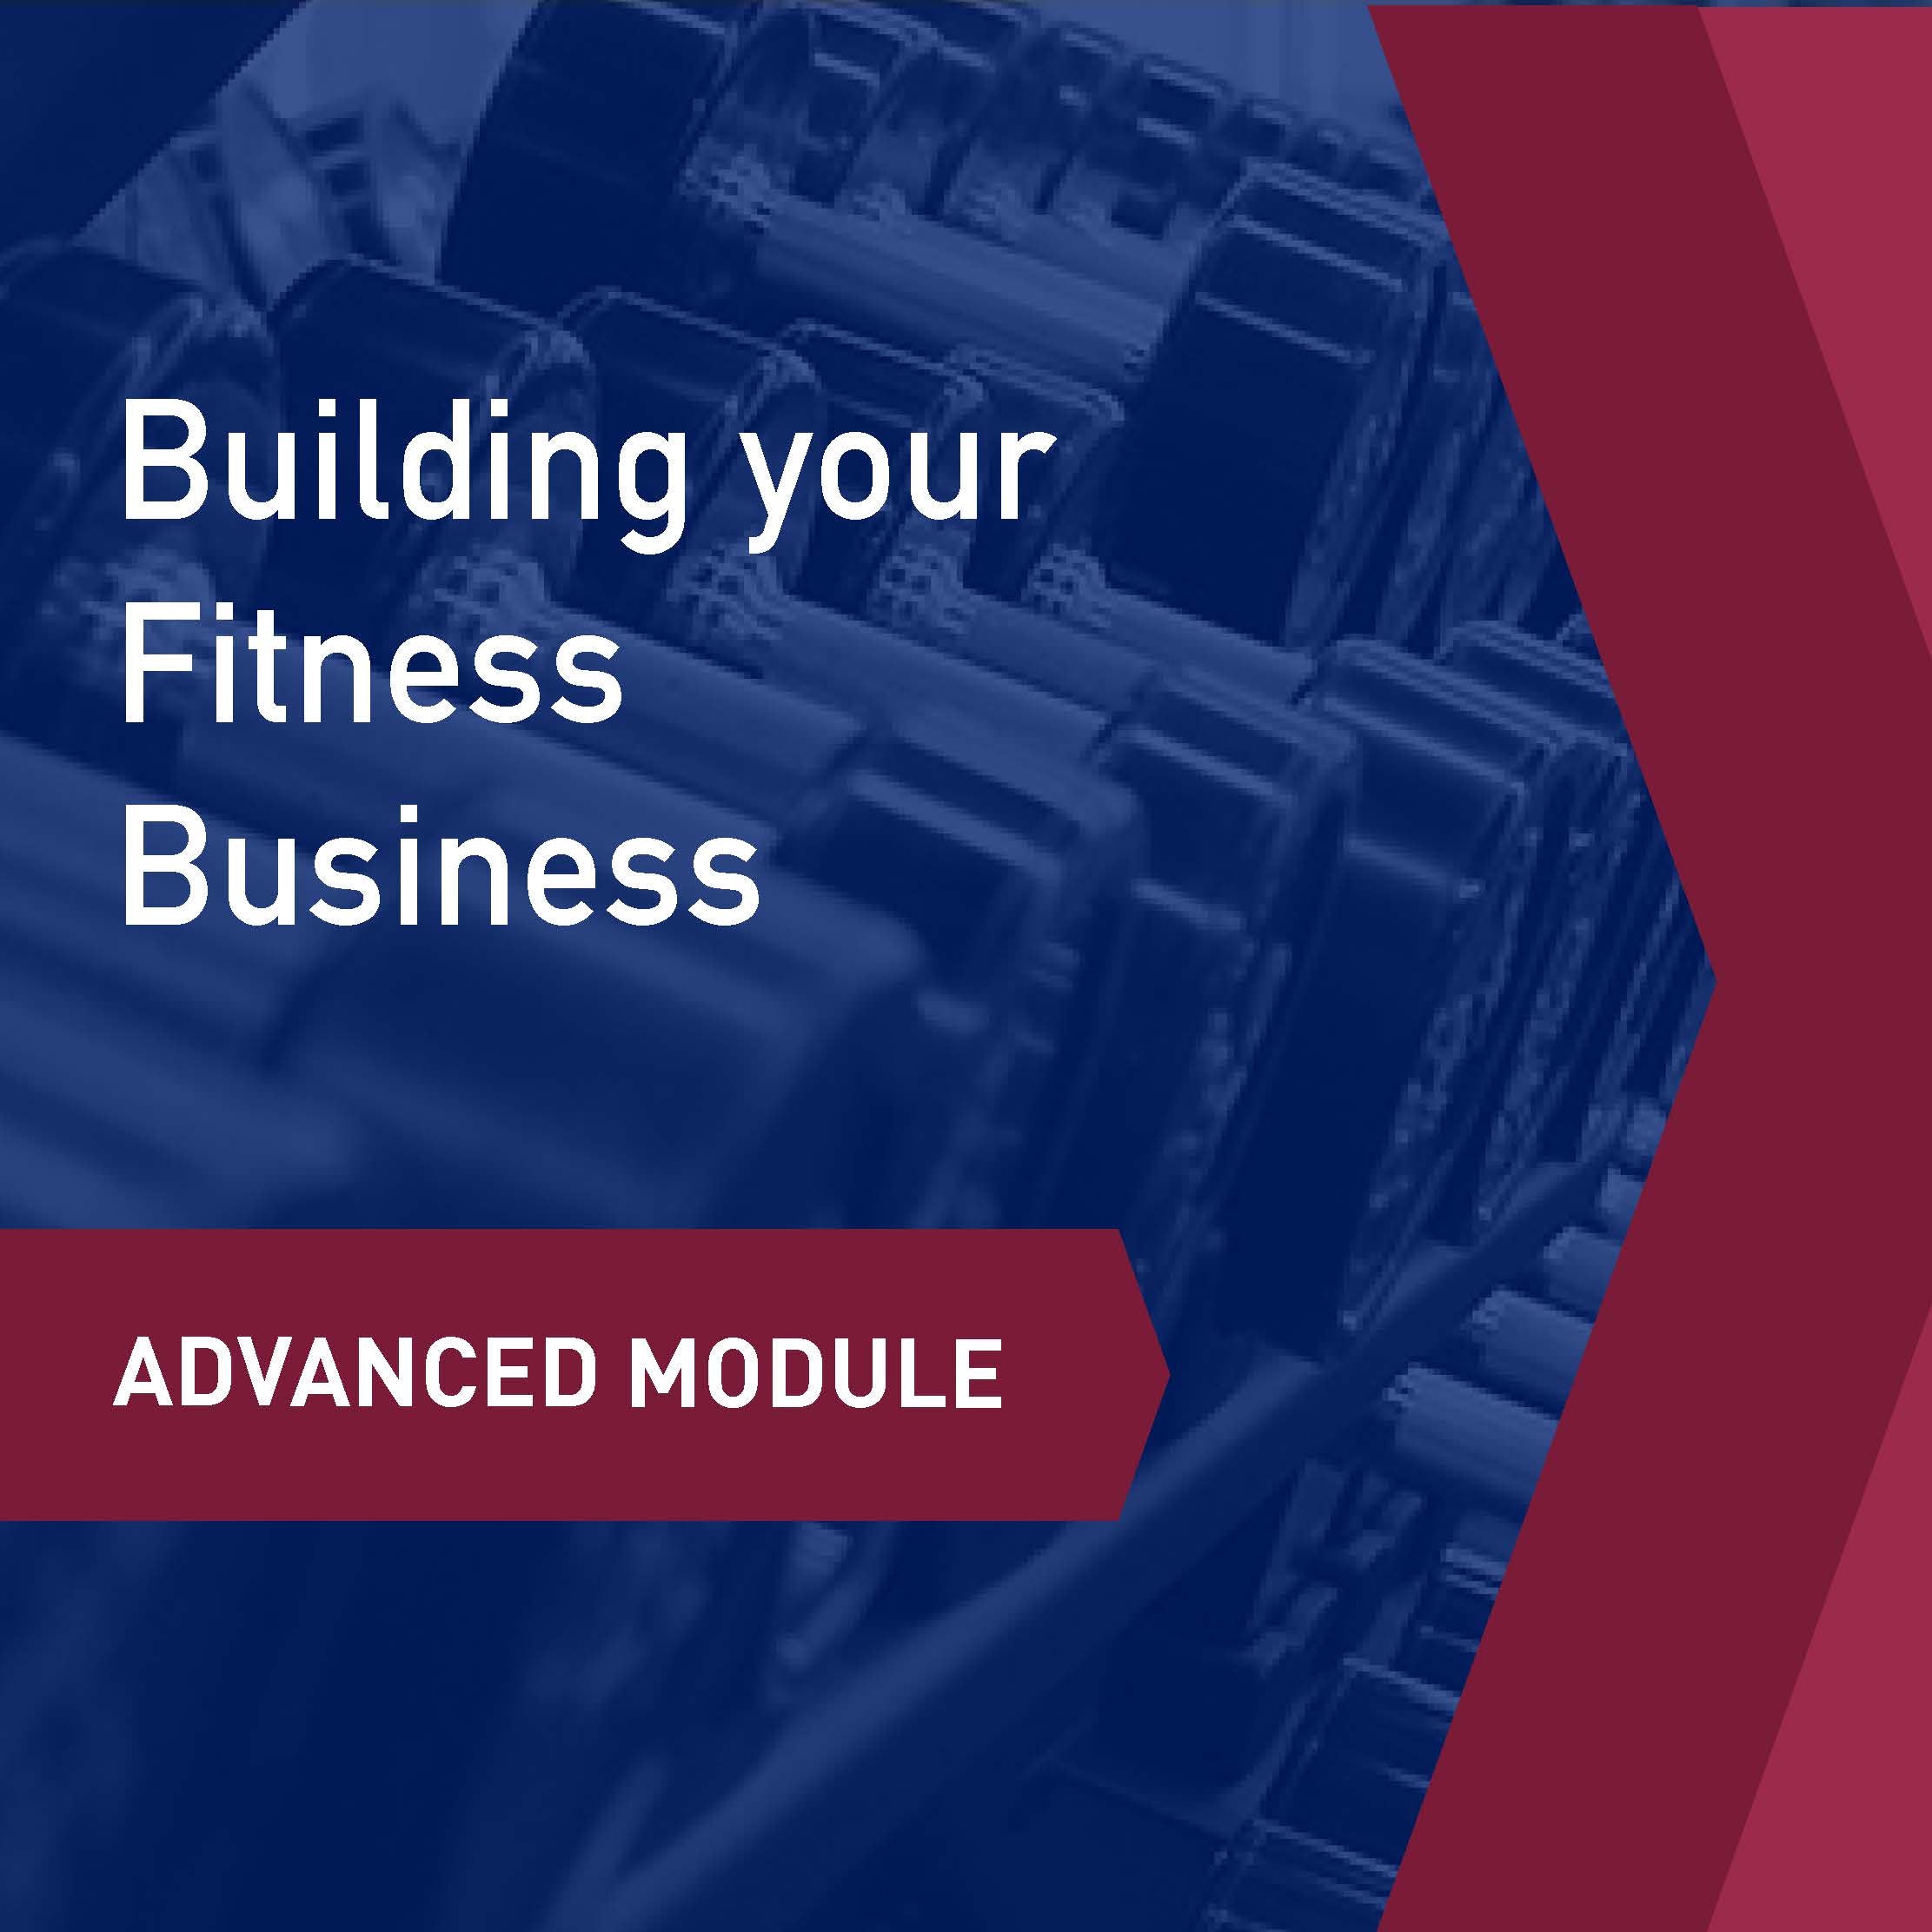 Advanced Learning Module: Building your Fitness Business